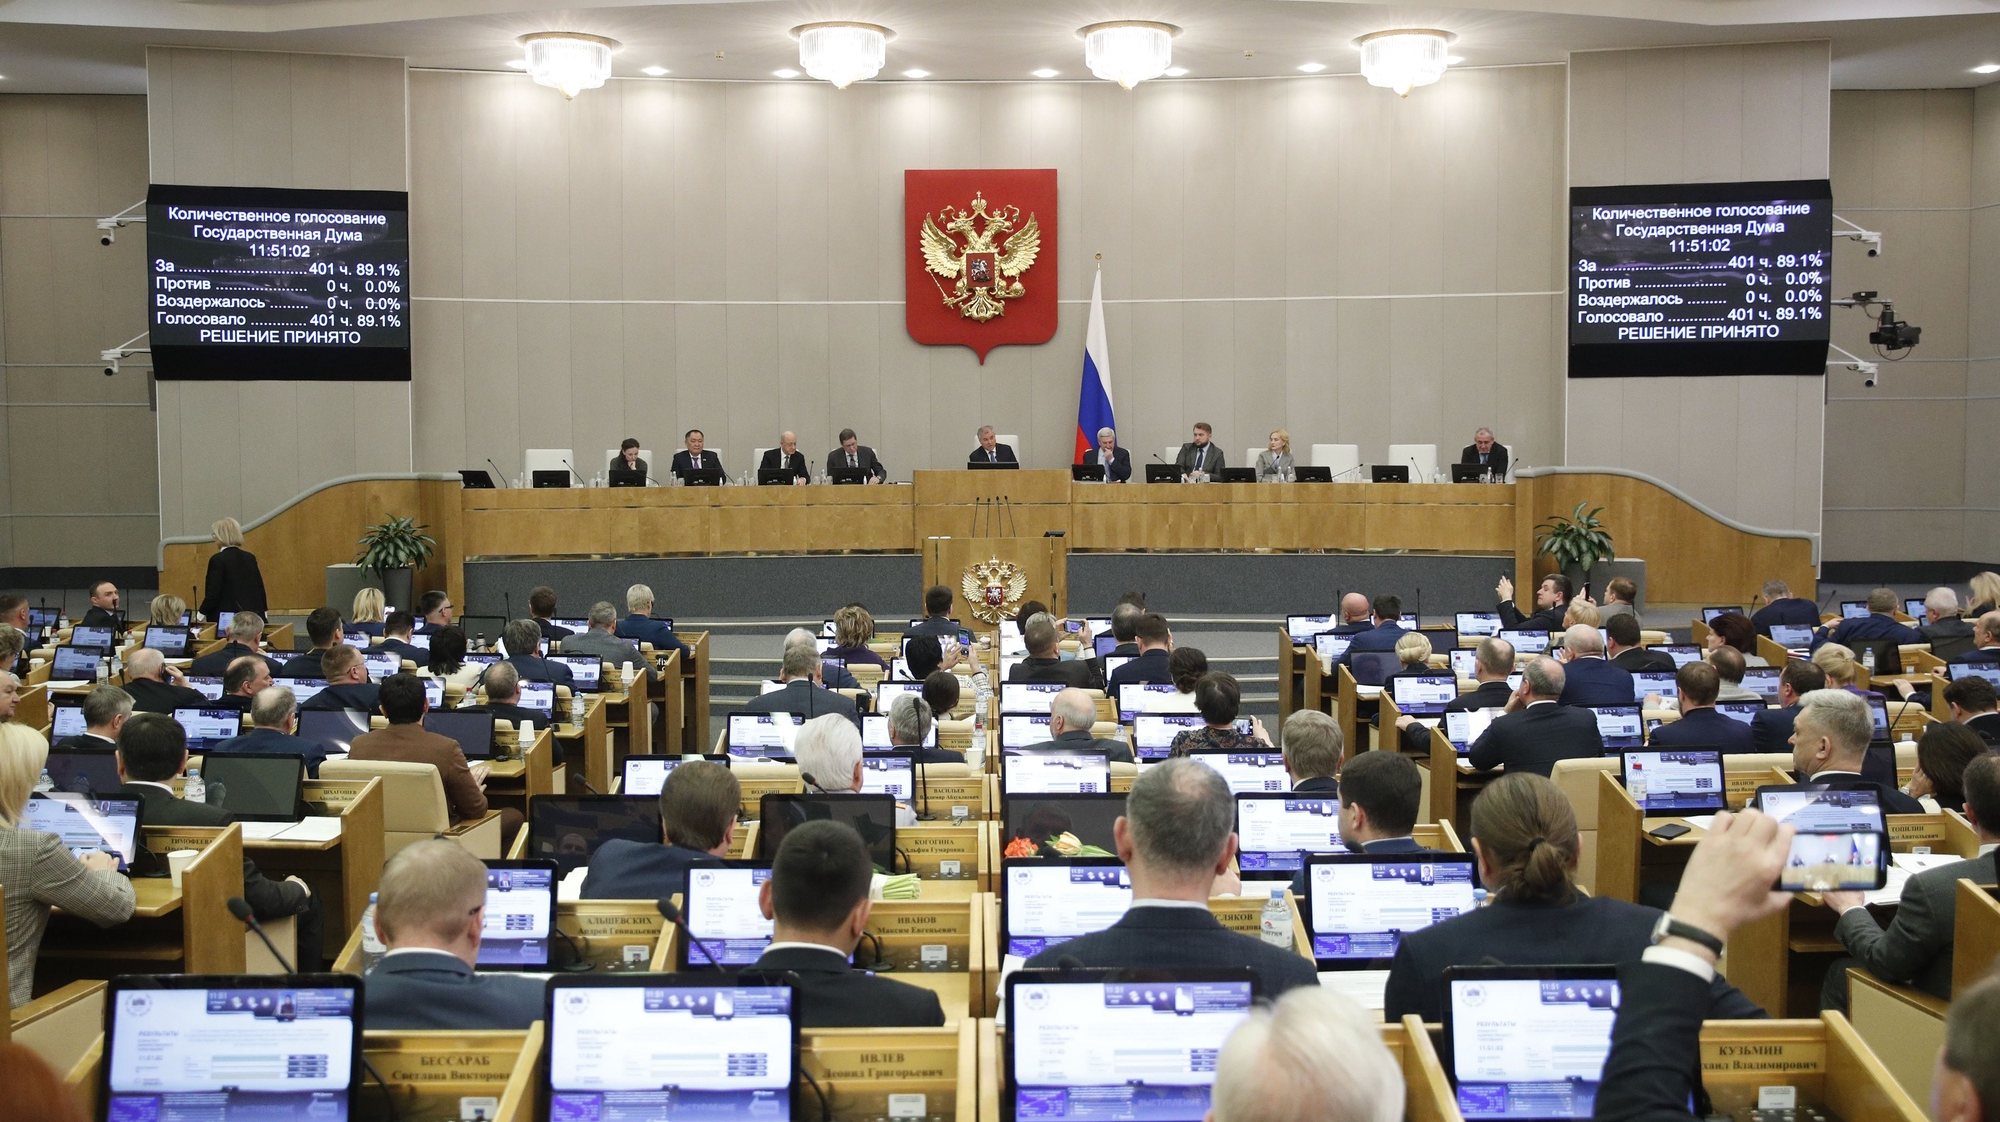 epa10483591 A handout photo made available by the press service of the Russian State Duma (lower house of Russian parliament) shows a plenary session of the Russian State Duma which unanimously adopted a law on the suspension of Russia&#039;s participation in the New START in Moscow, Russia, 22 February 2023. Russian President Vladimir Putin announced in a speech 21 February 2023 that Russia was suspending its participation in the START, but not withdrawing from the treaty. The current Strategic Offensive Arms Treaty, or START-3, was signed in 2010 by Dmitry Medvedev and US President Barack Obama. The document envisaged limiting the volume of nuclear weapons of each of the countries.  EPA/RUSSIAN STATE DUMA PRESS SERVICE/HANDOUT HANDOUT  HANDOUT EDITORIAL USE ONLY/NO SALES